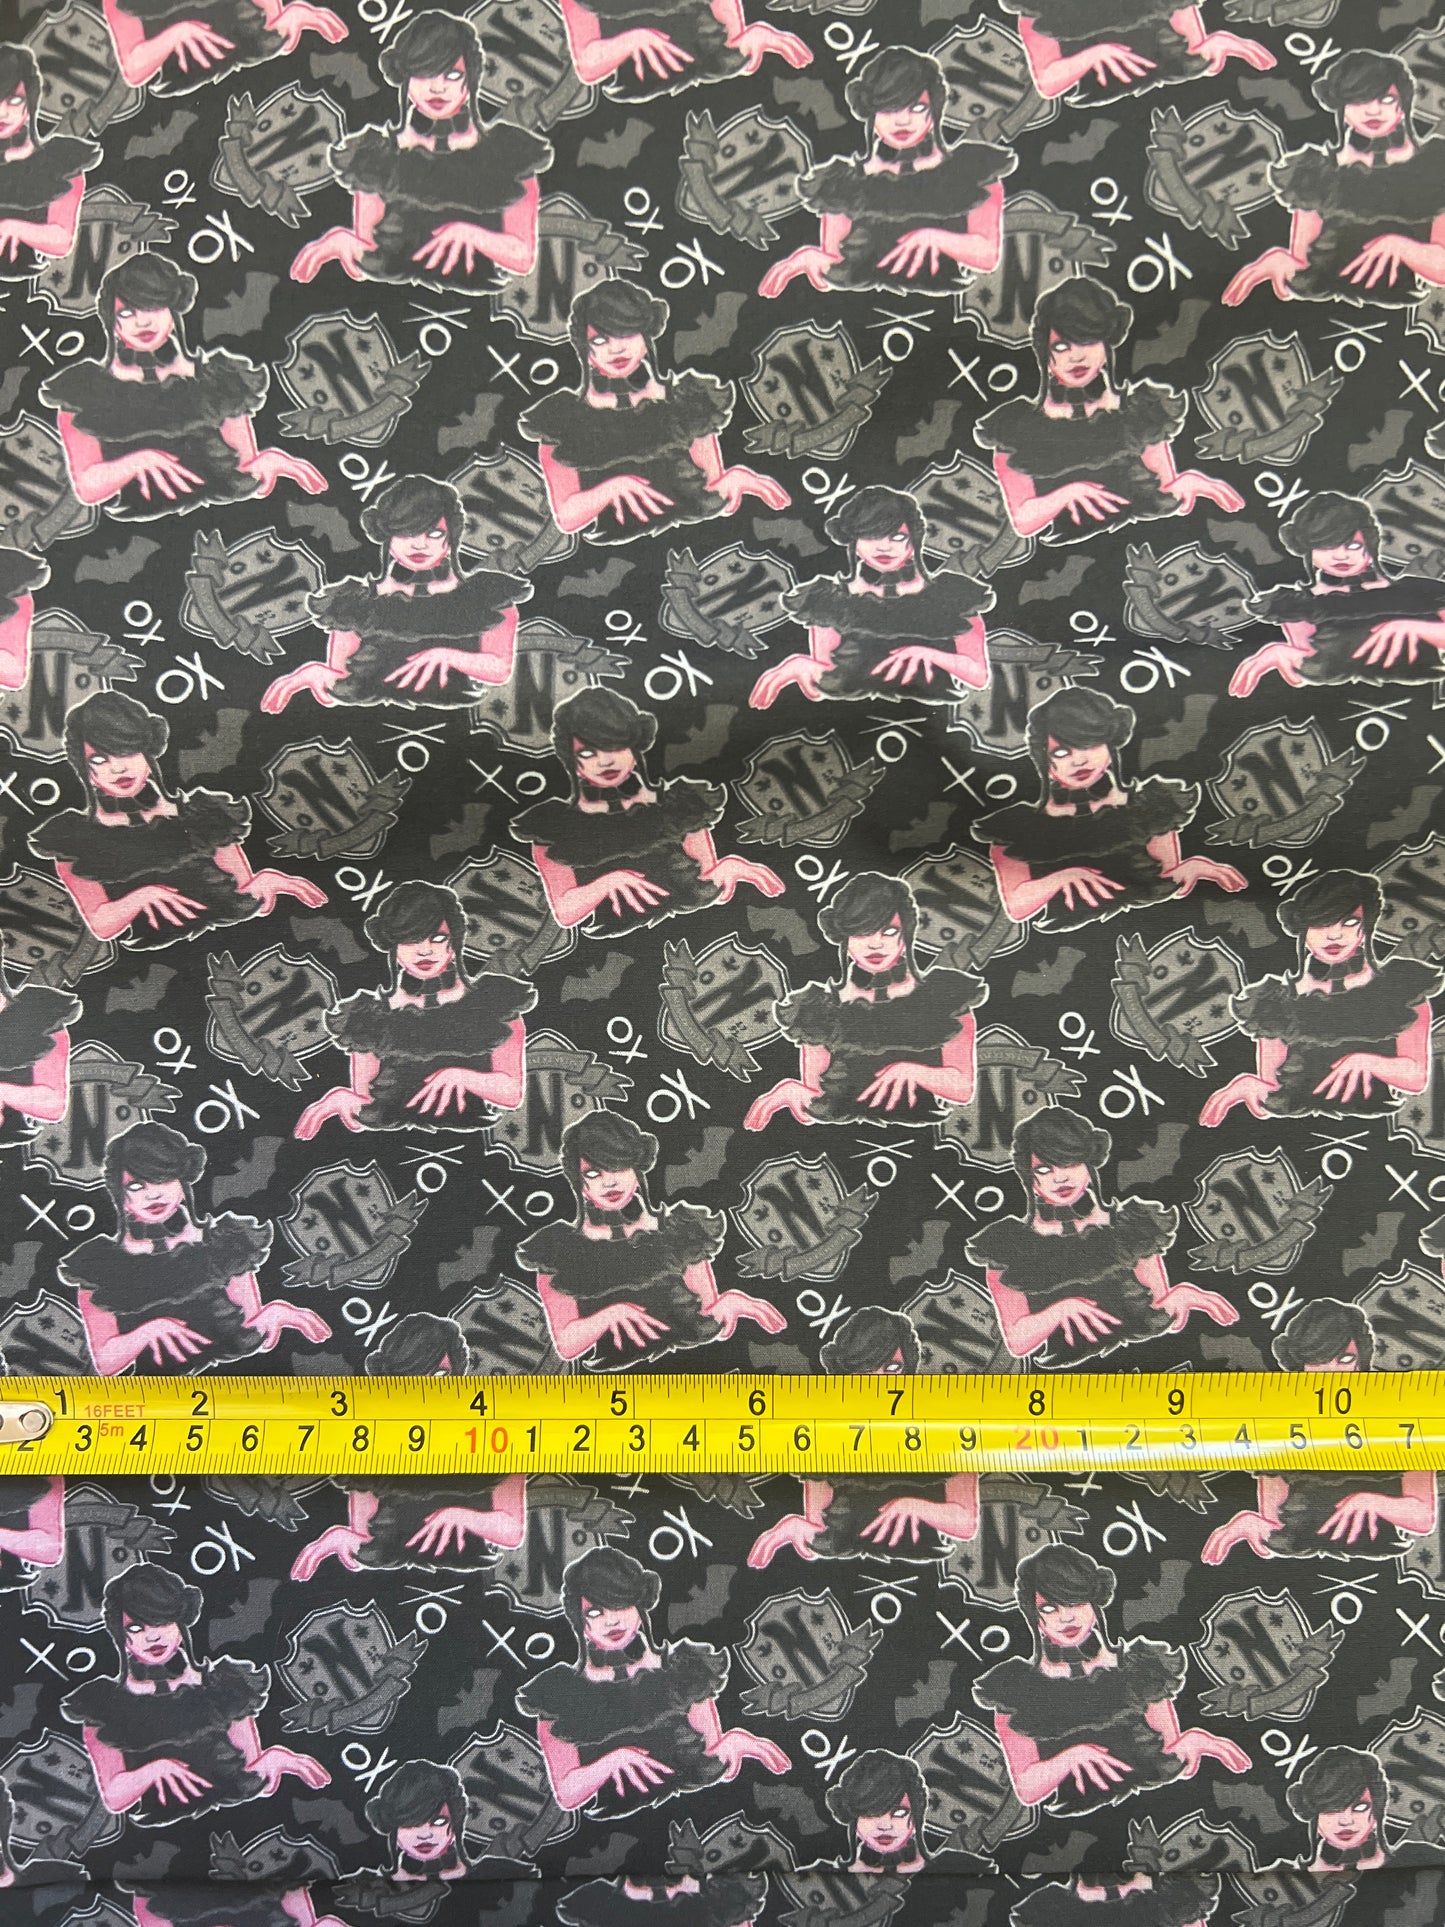 WEDNESDAY DANCE - Polycotton Fabric from Japan